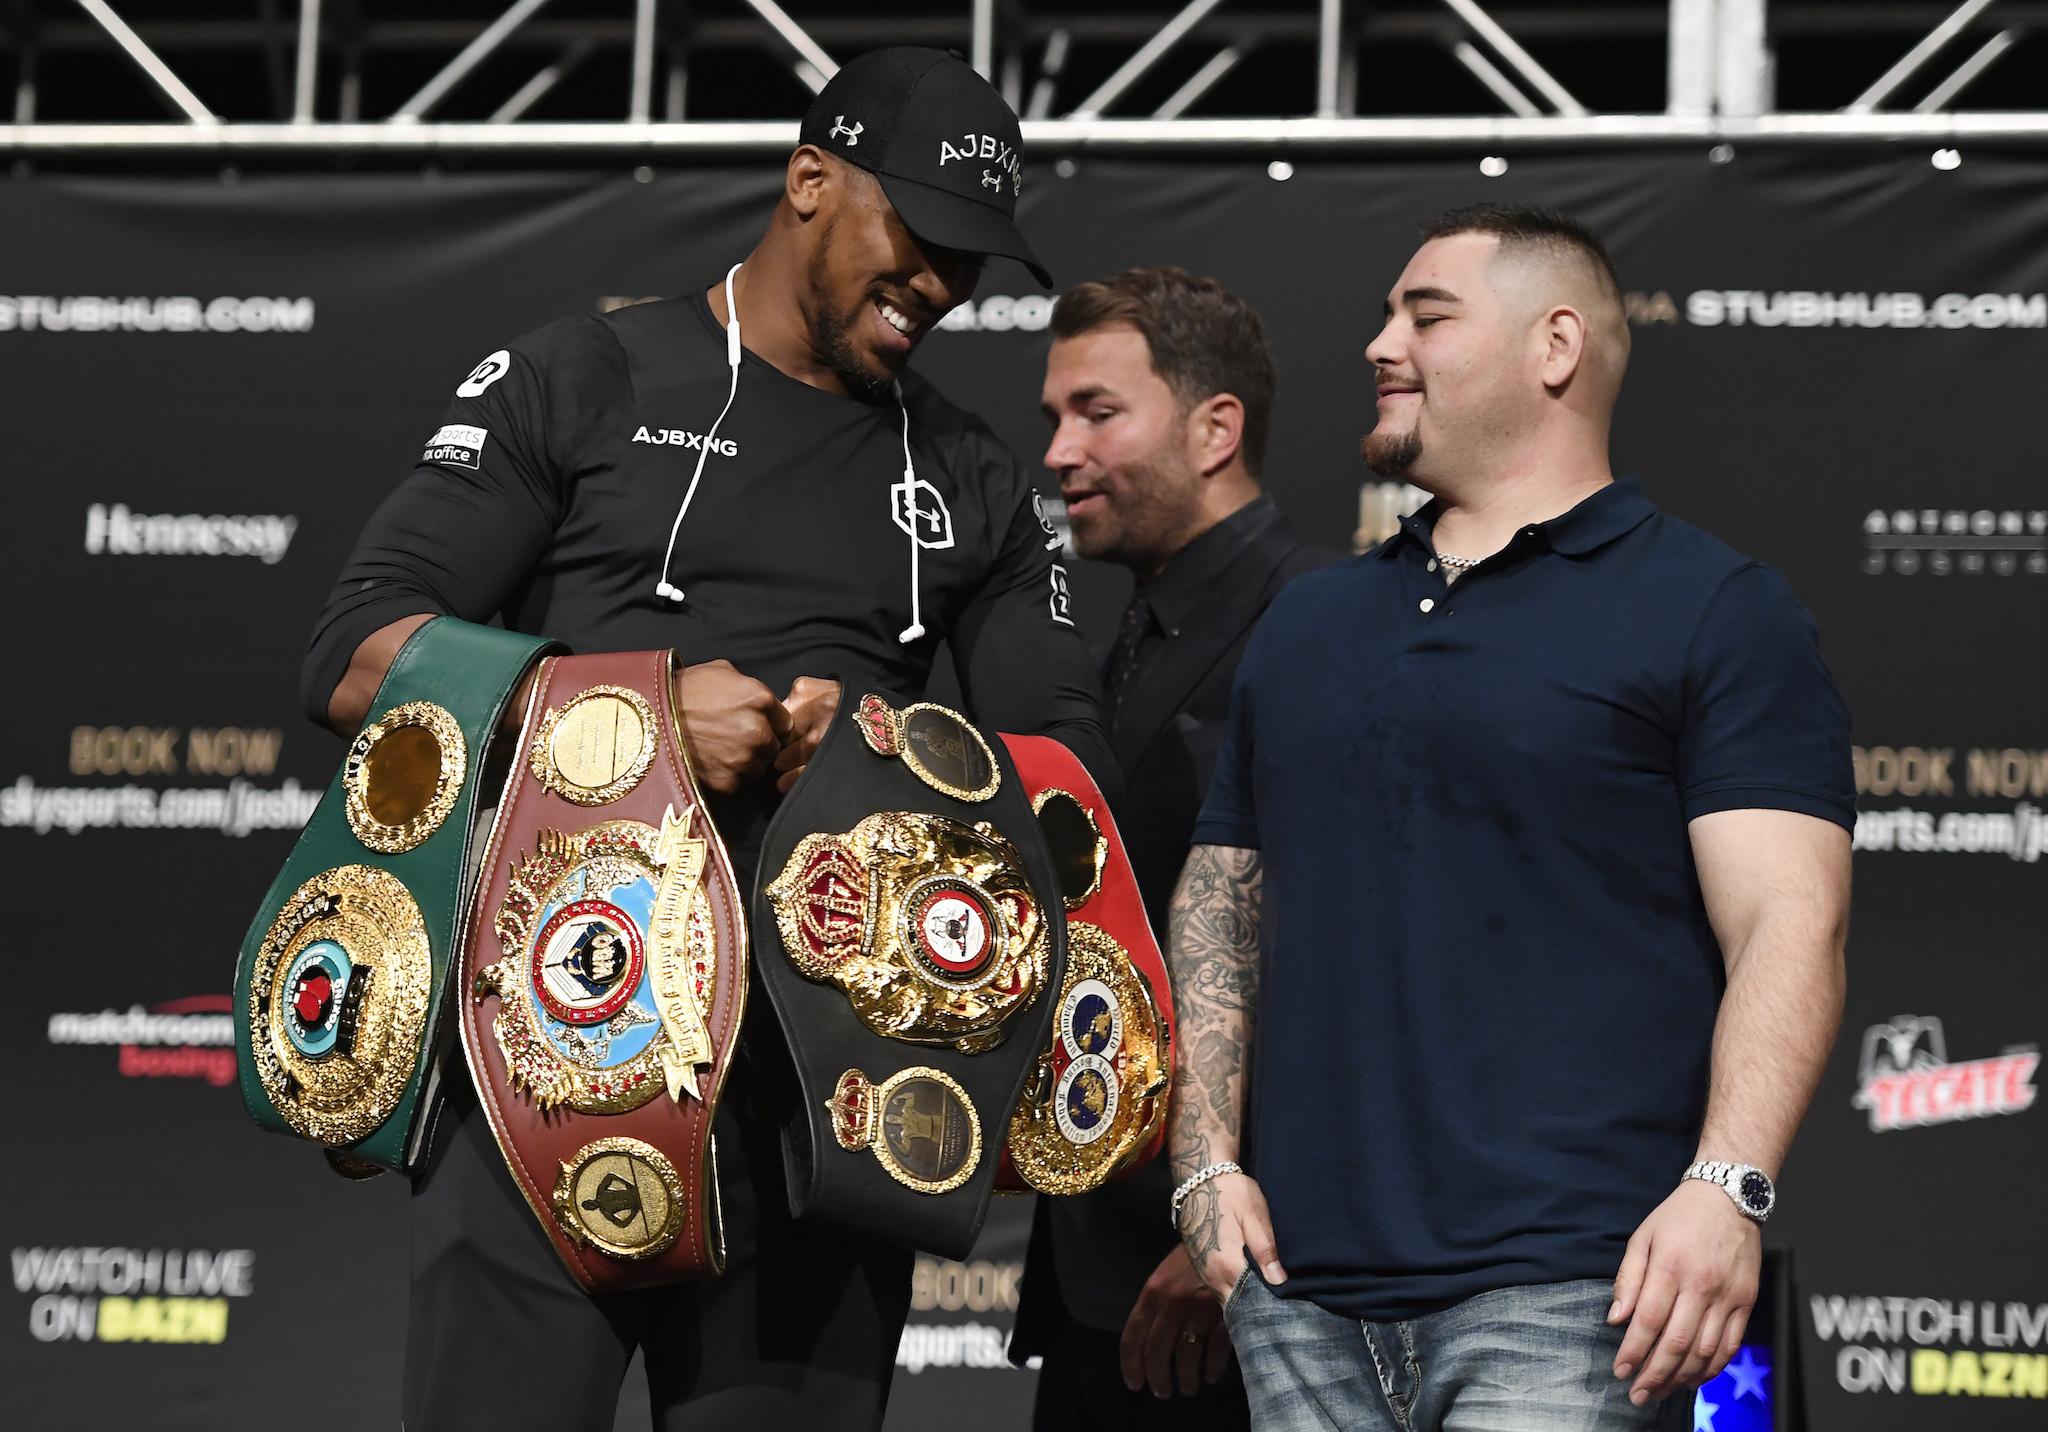 Joshua vs Ruiz Free boxing streams flood across YouTube and other sites, but experts warn about danger of illegal links The Independent The Independent